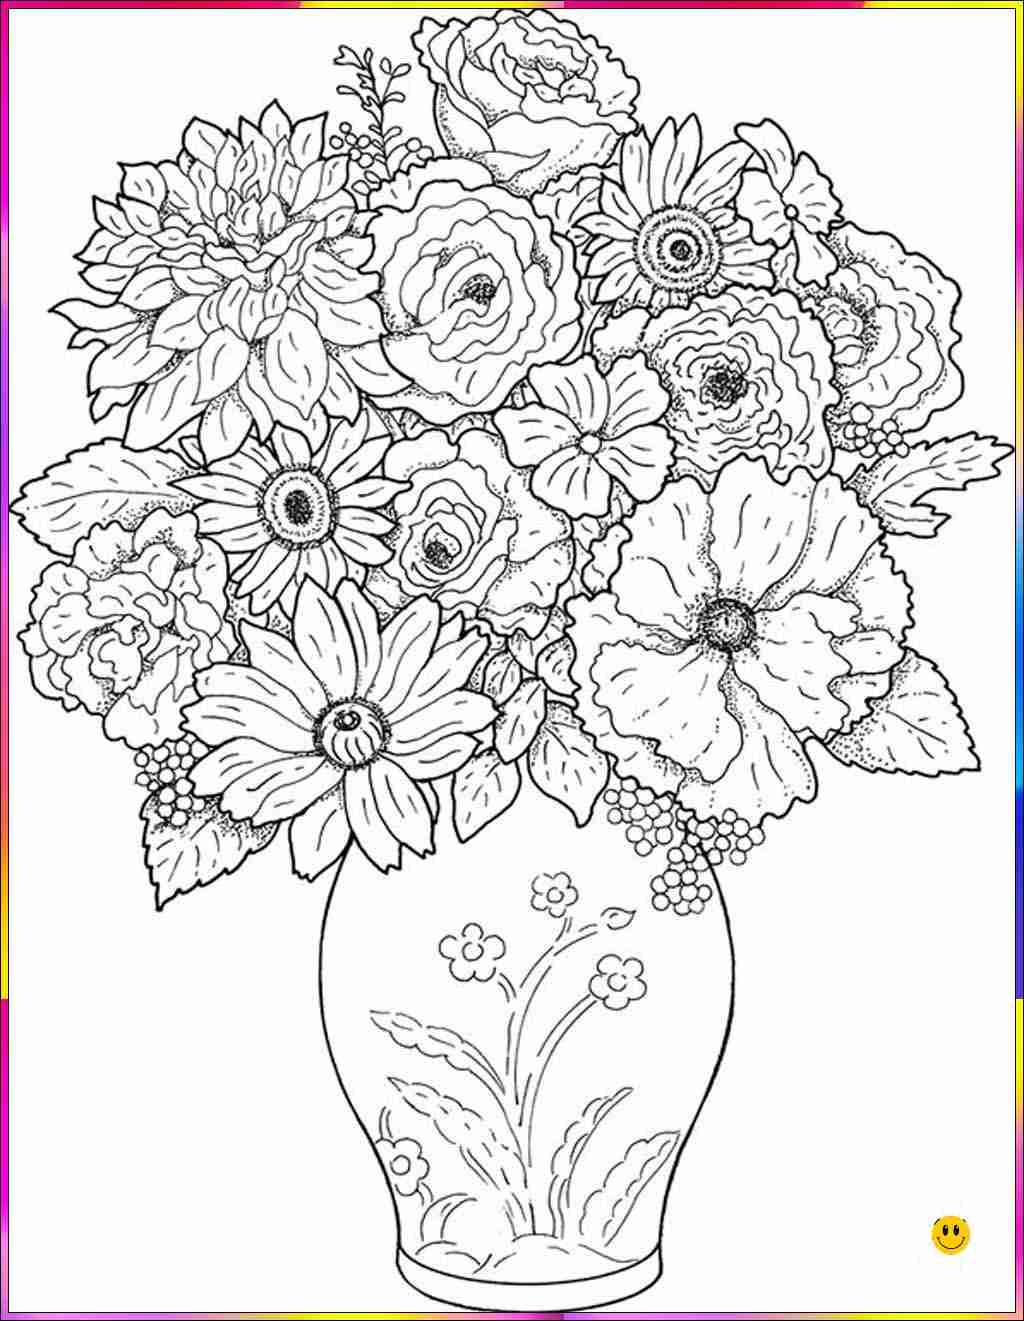 flowers drawing image
